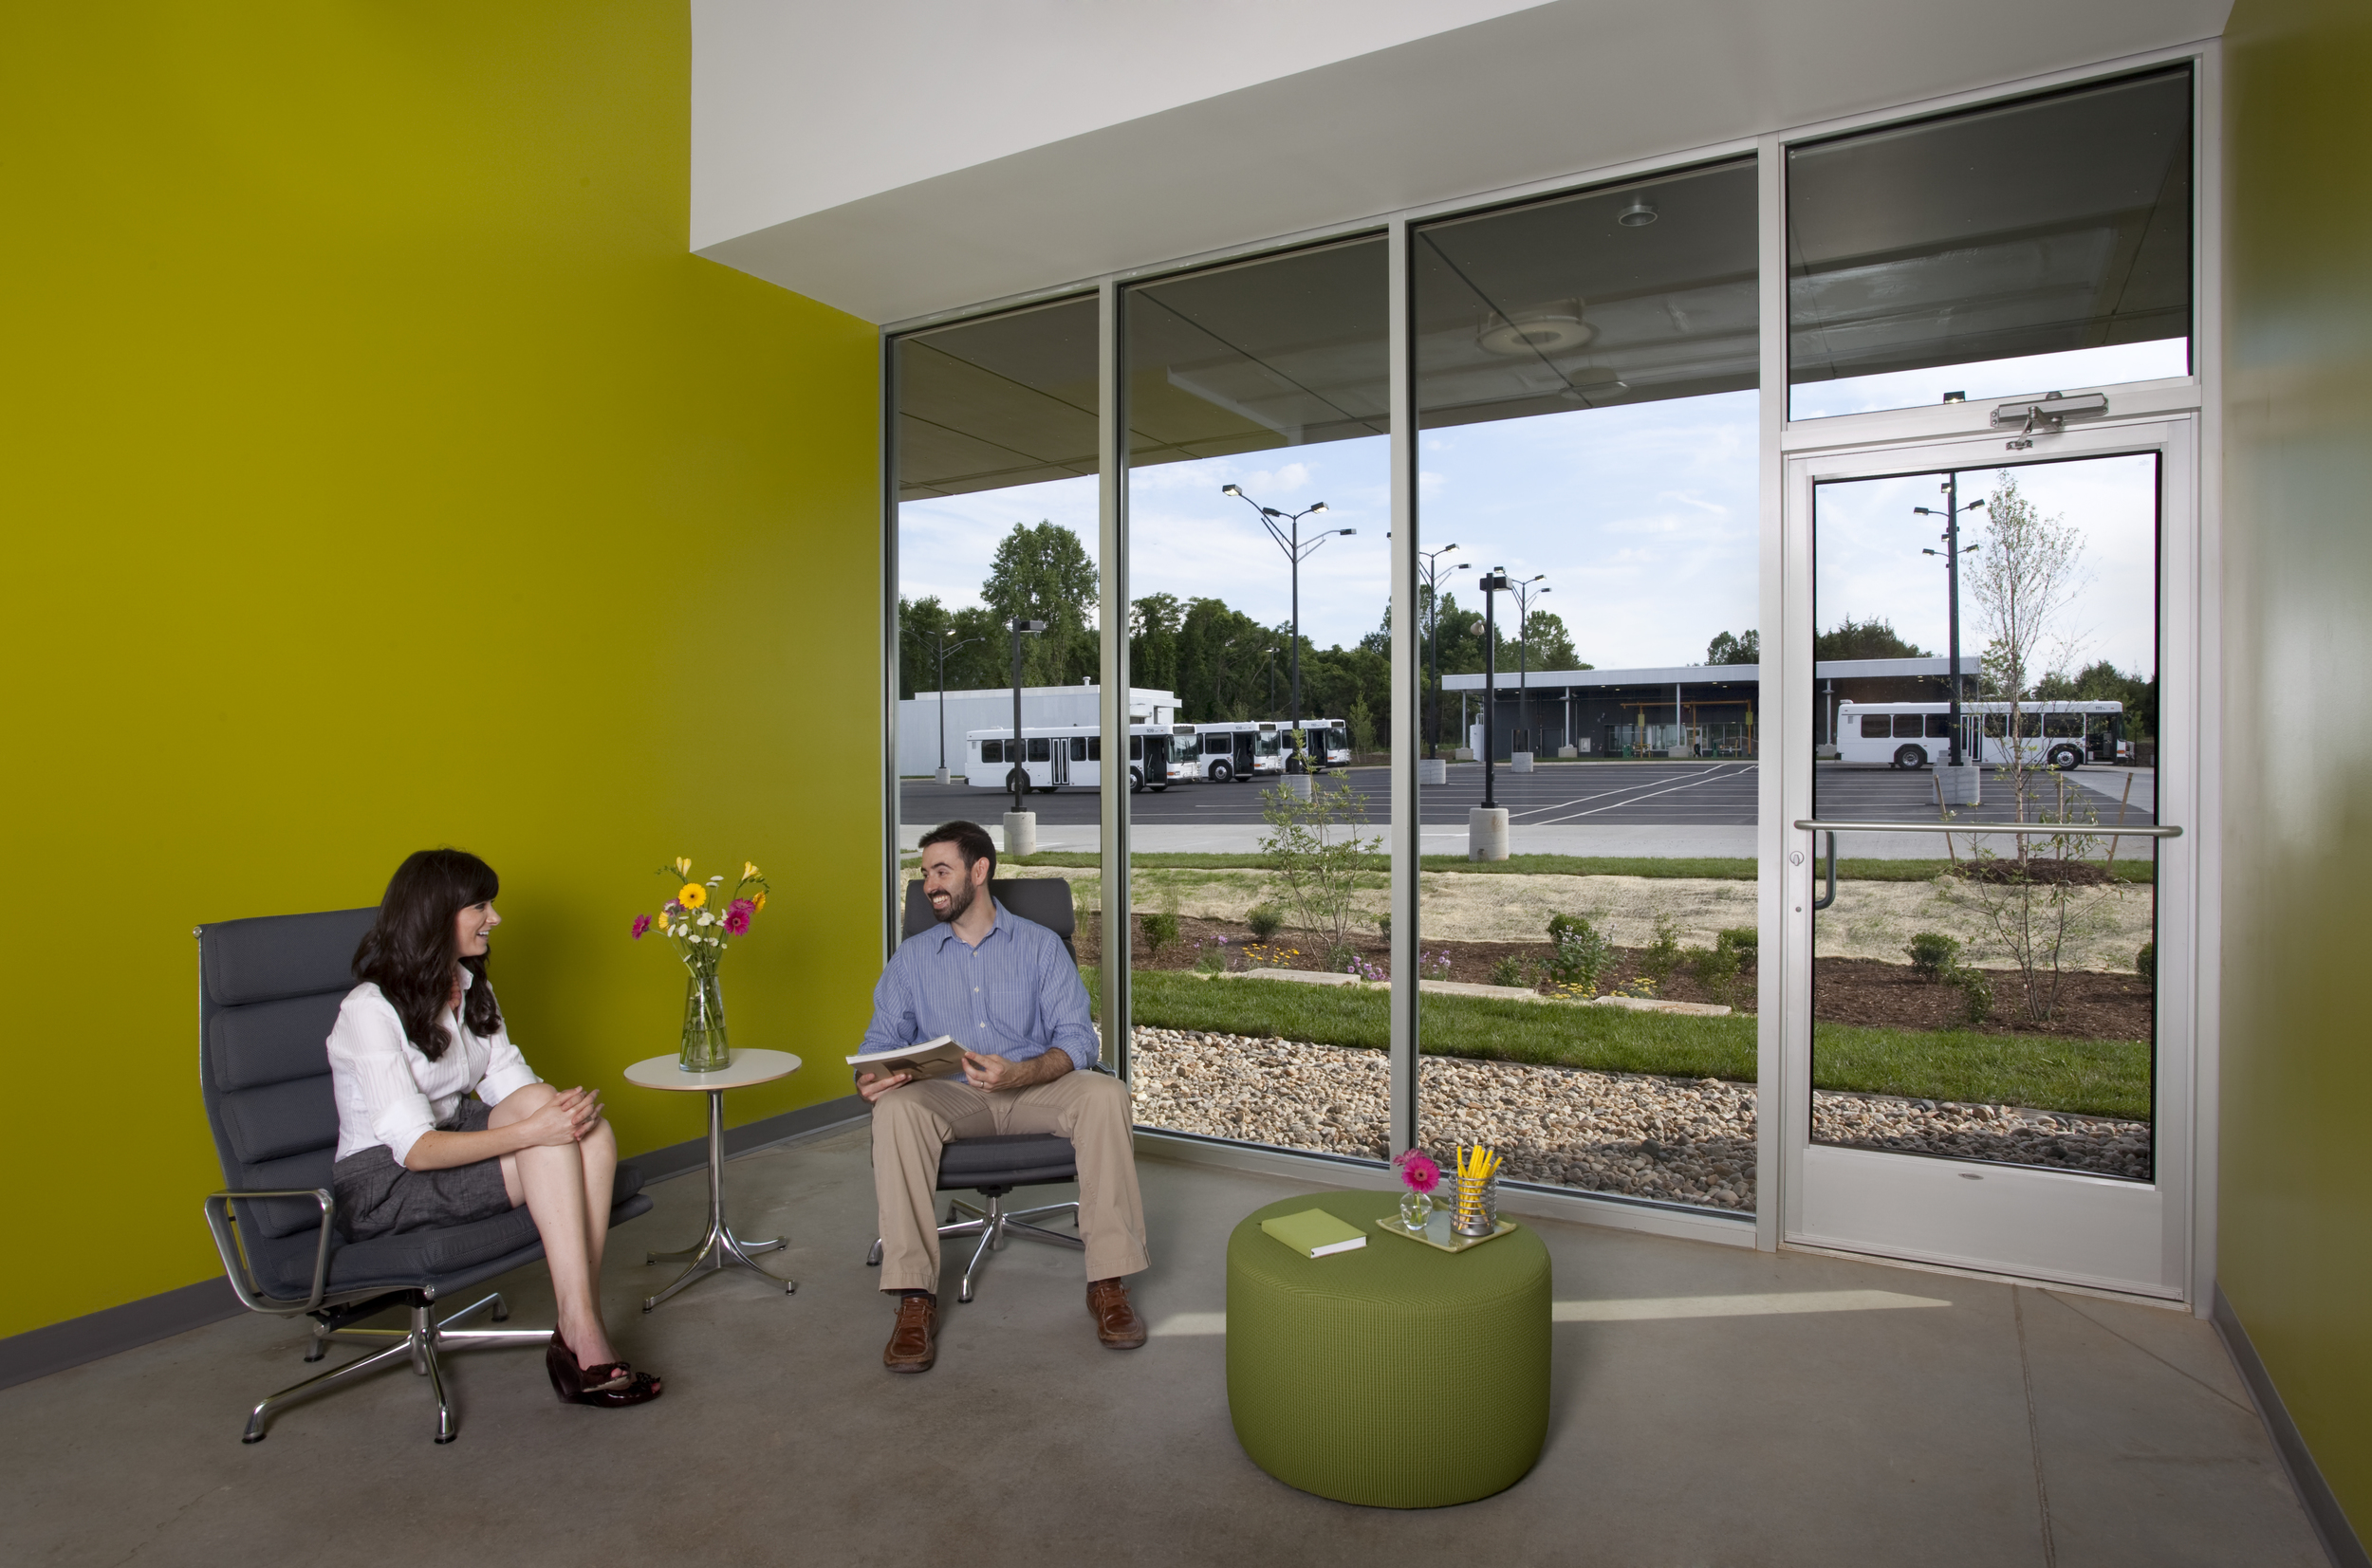 From the staff lounge, employees enjoy simultaneous views of the butterfly garden and the transit vehicle parking area.